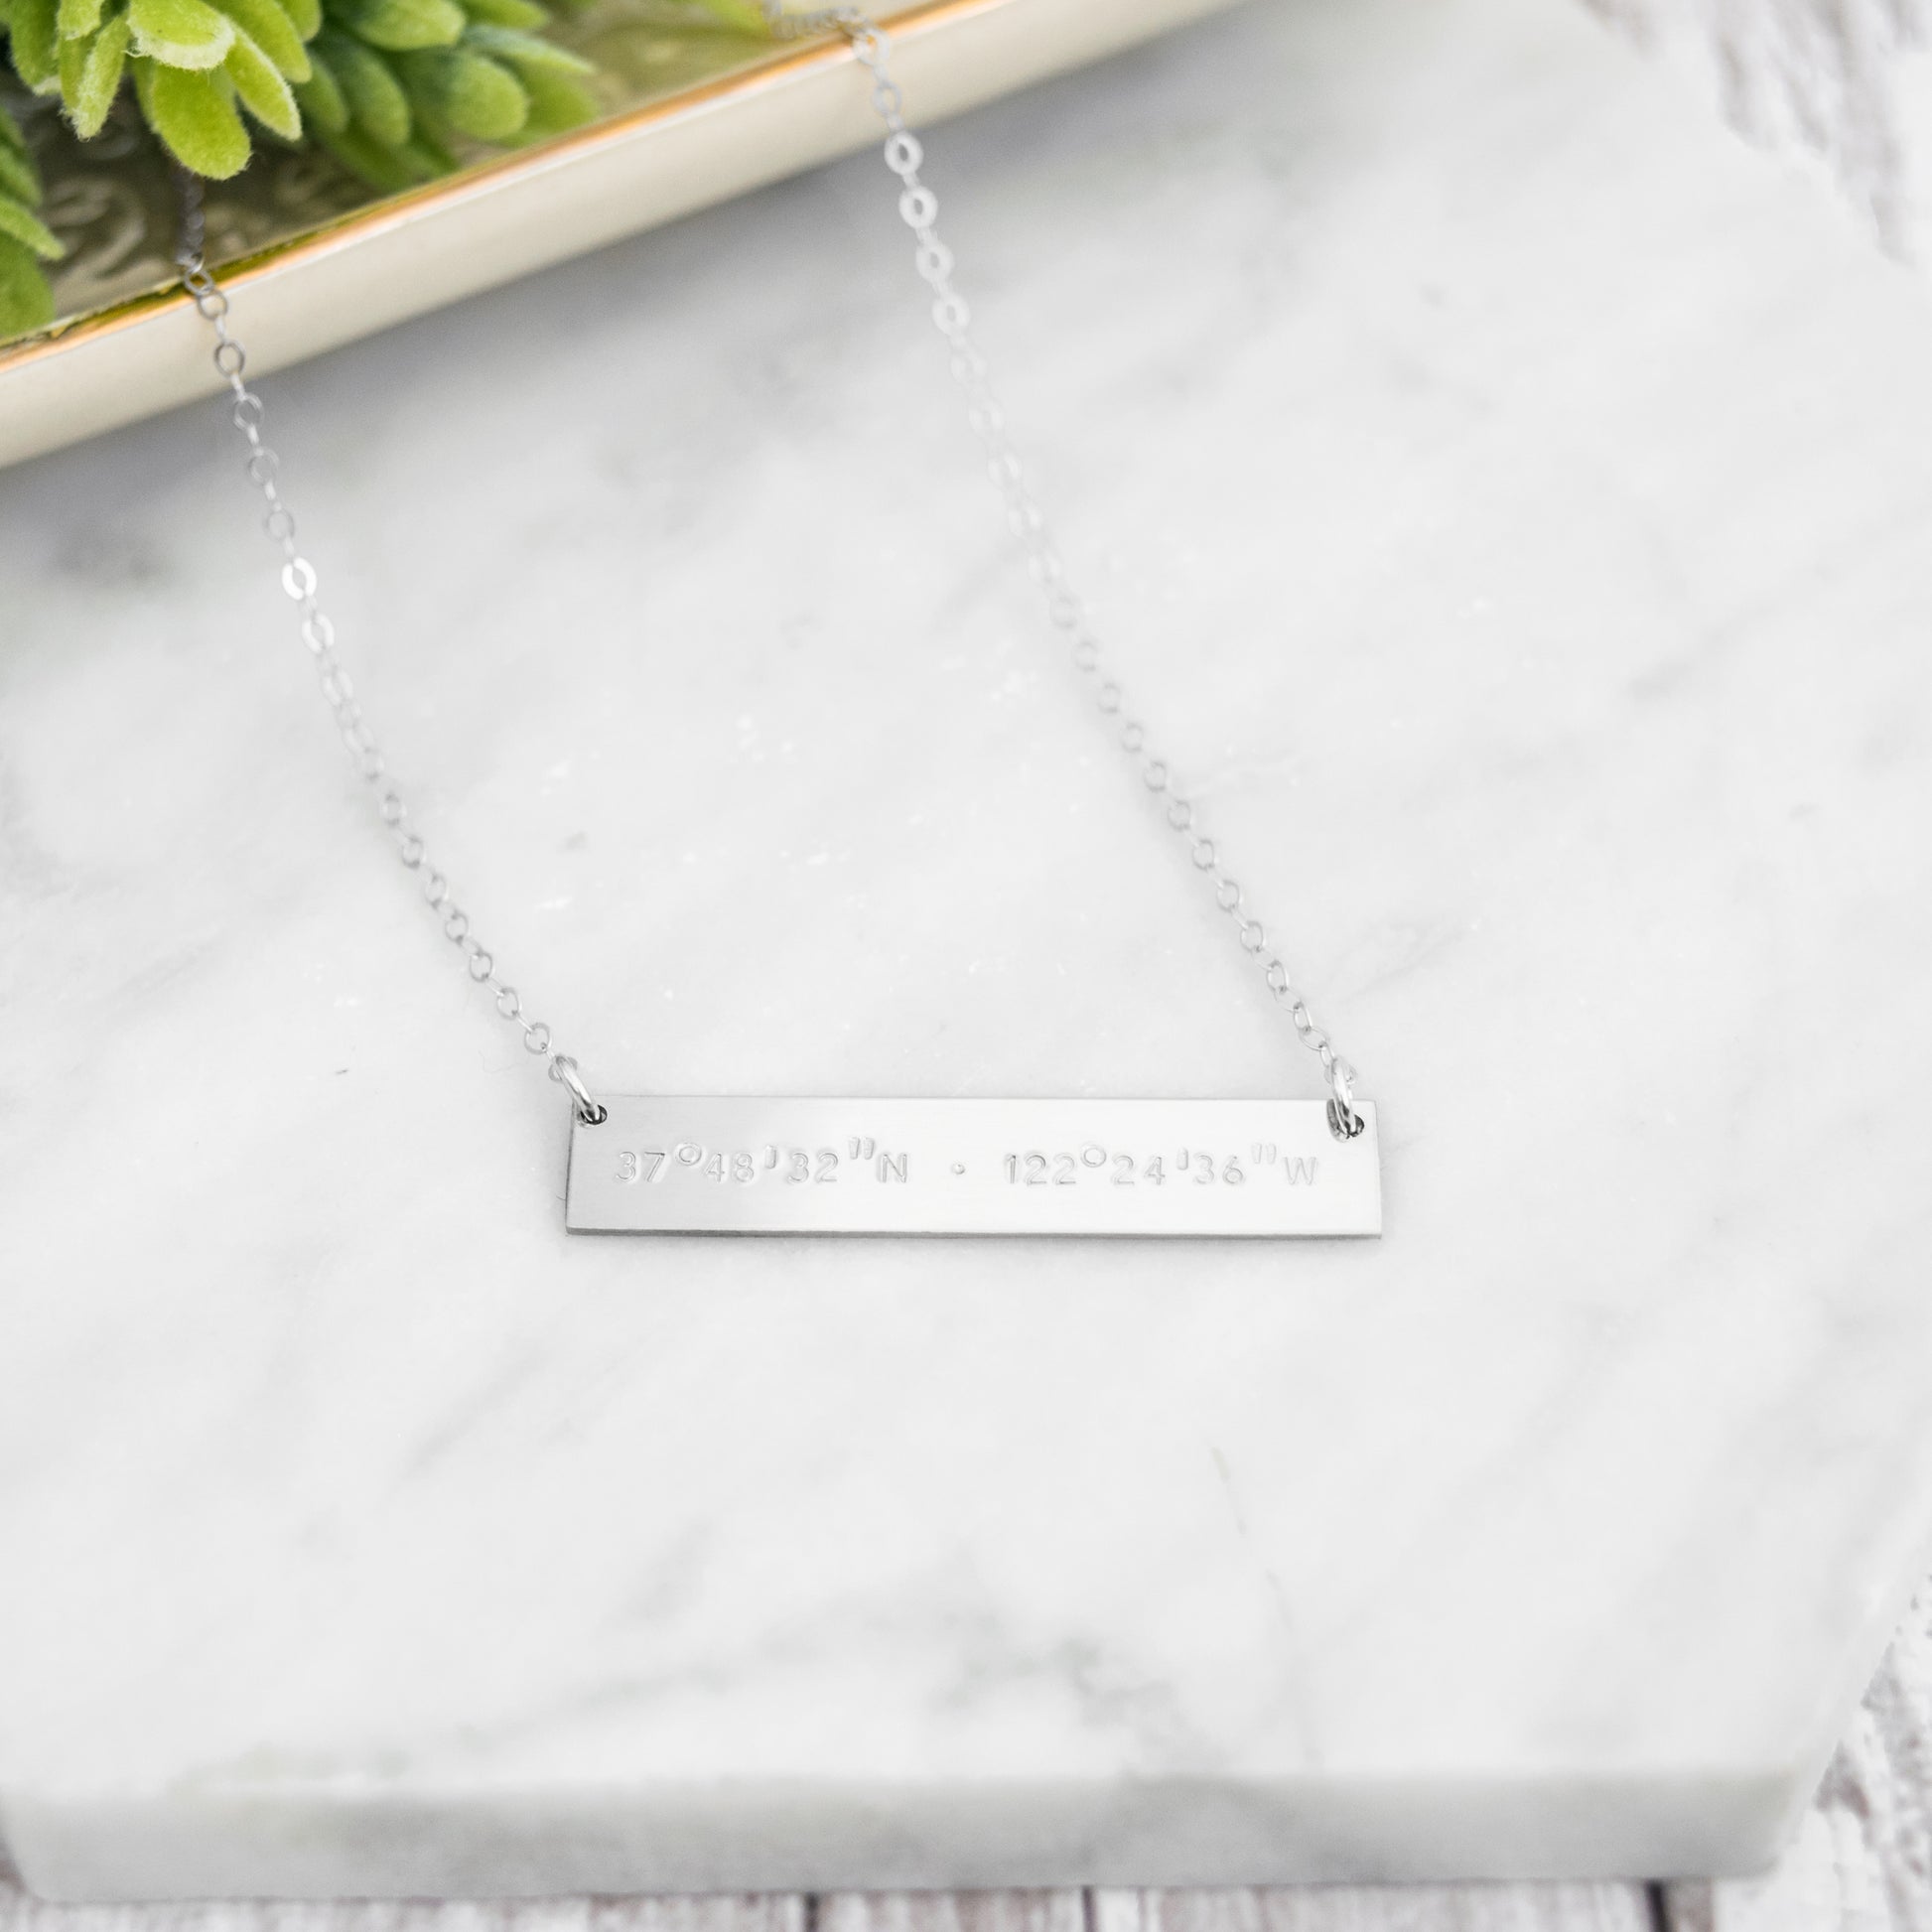 Hand stamped coordinates on a sterling silver bar